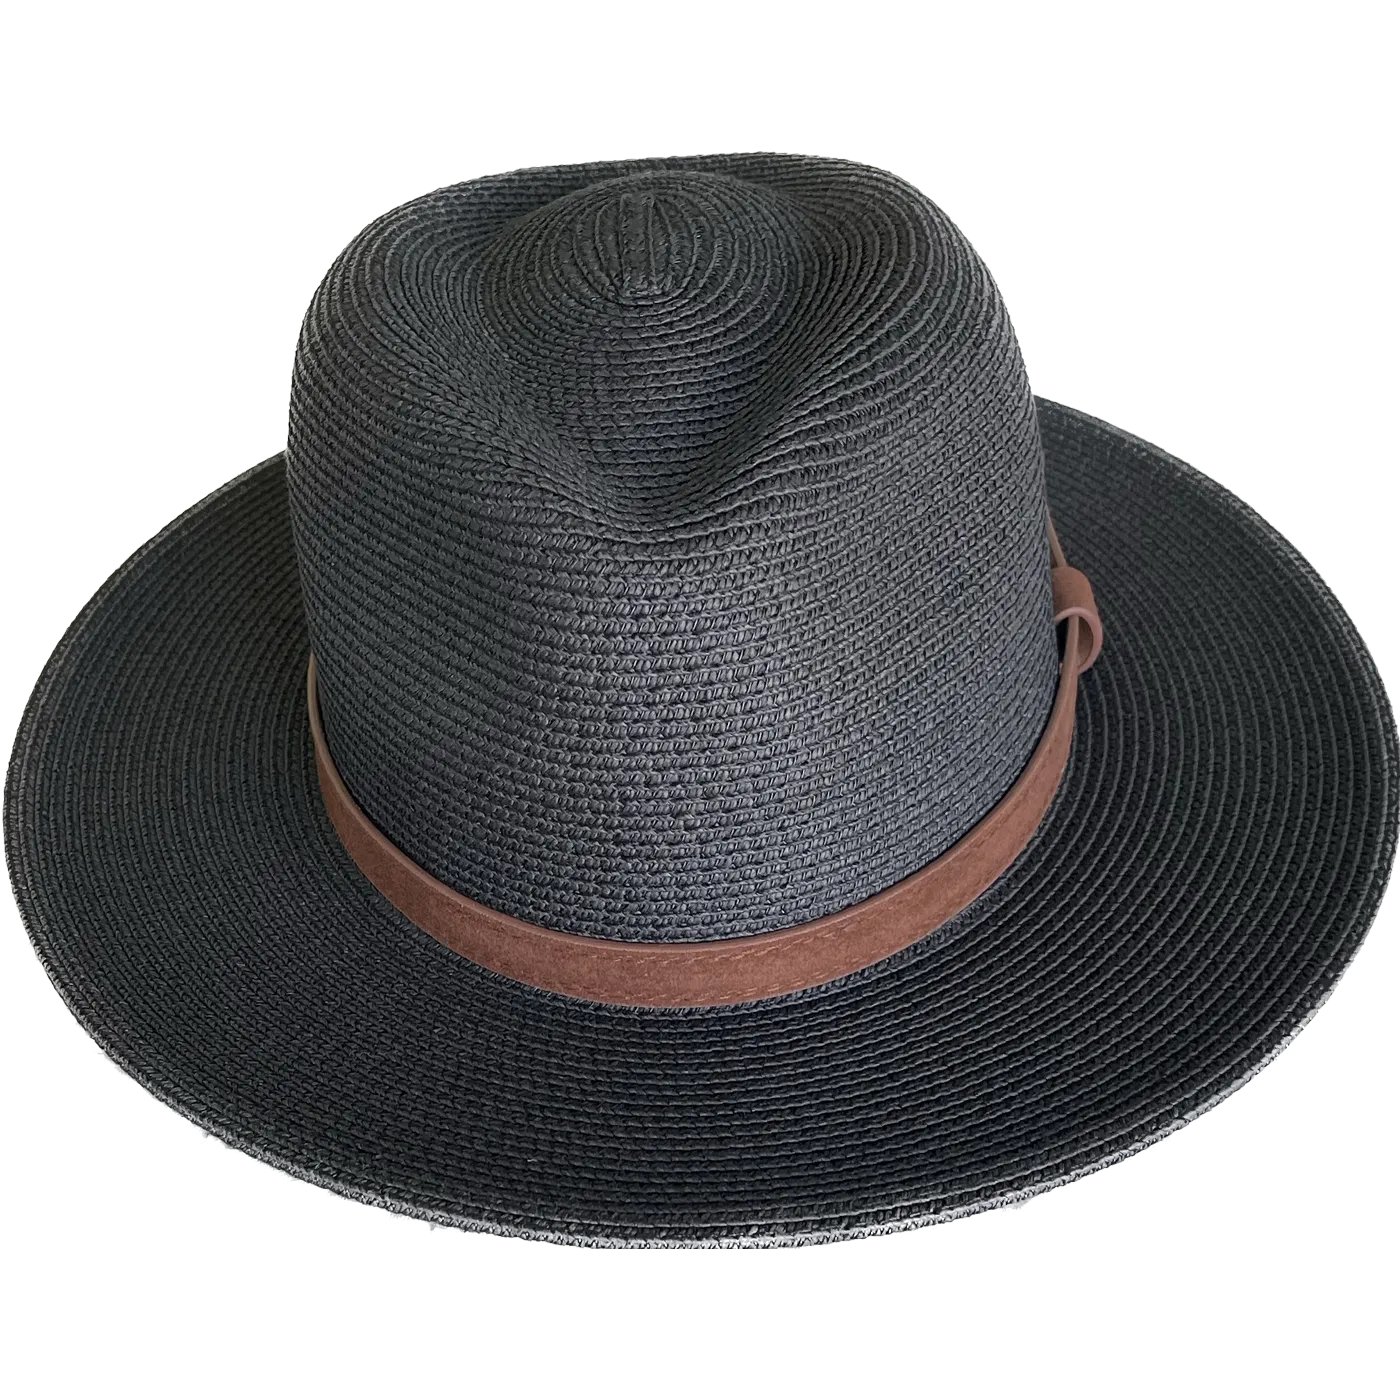 Panama Hat in Black accented with a Brown Leather Belt